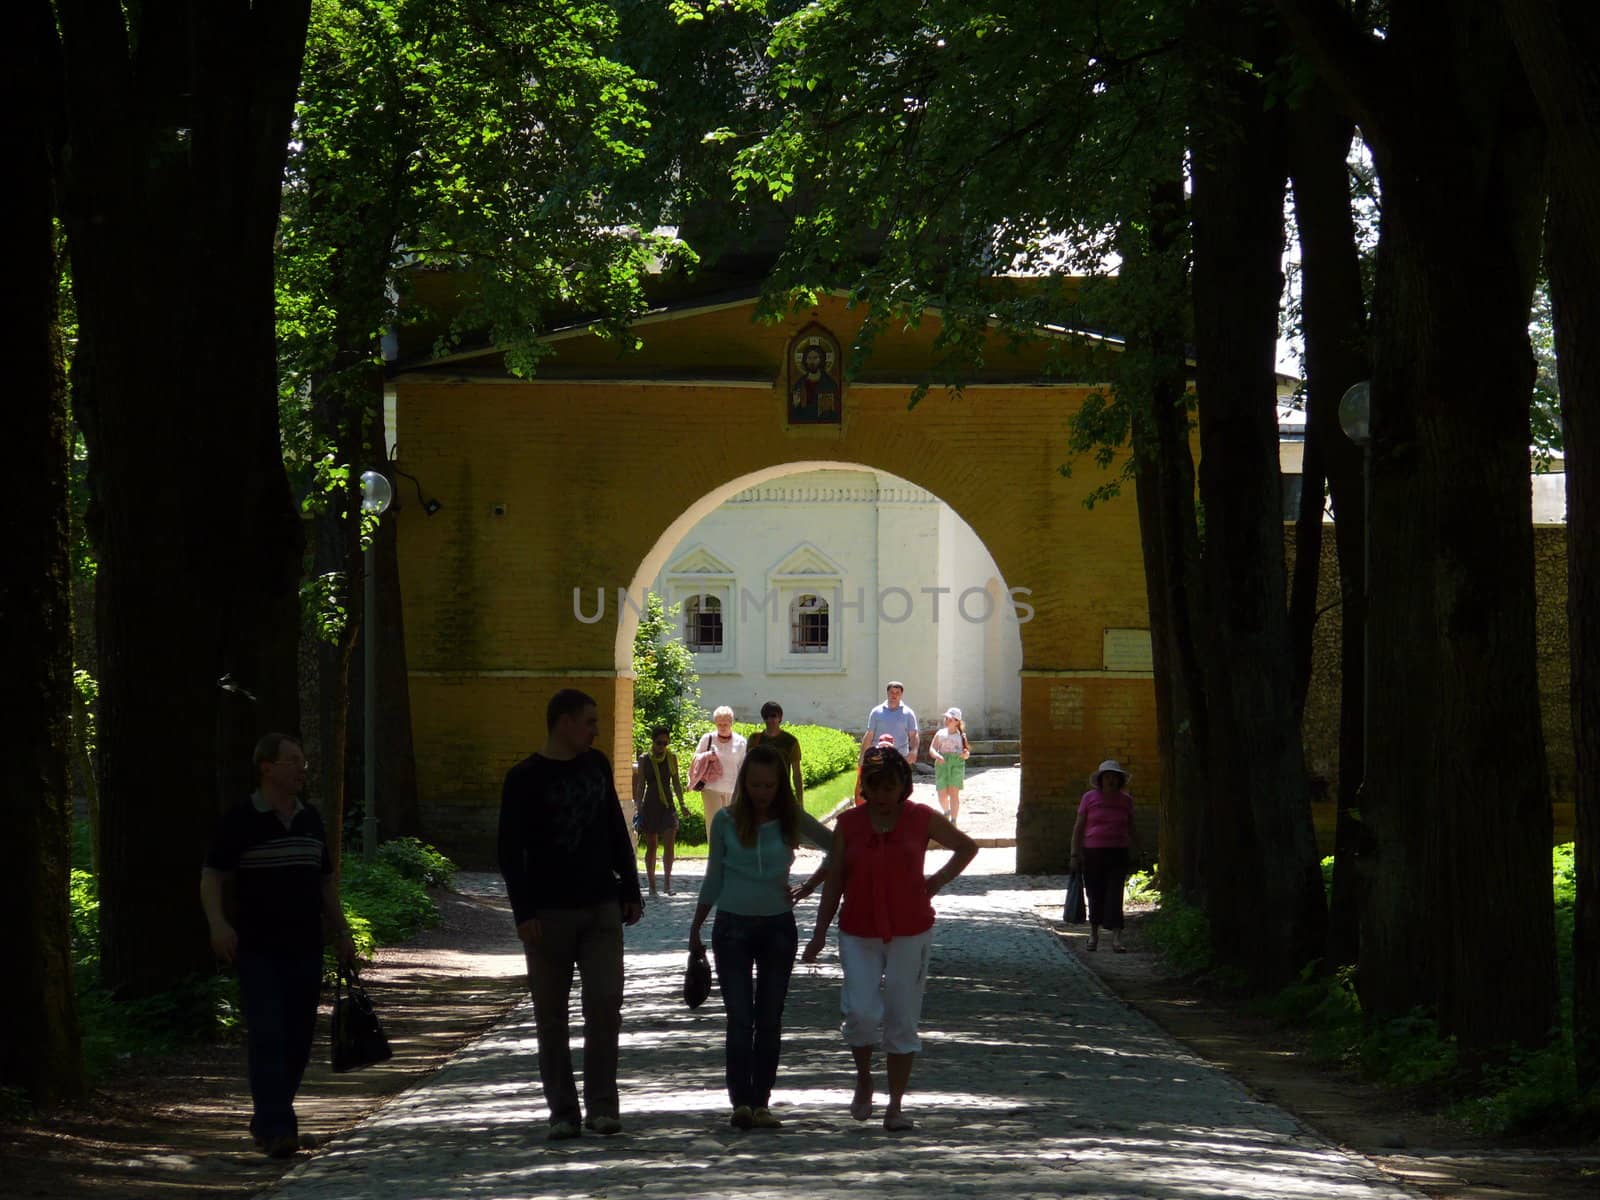 Moscow, Russia - May 22, 2010: Spring day. Peoples walks near the Saint Gates on May 22, 2010 in Arkhangelskoye Estate, Moscow, Russia.